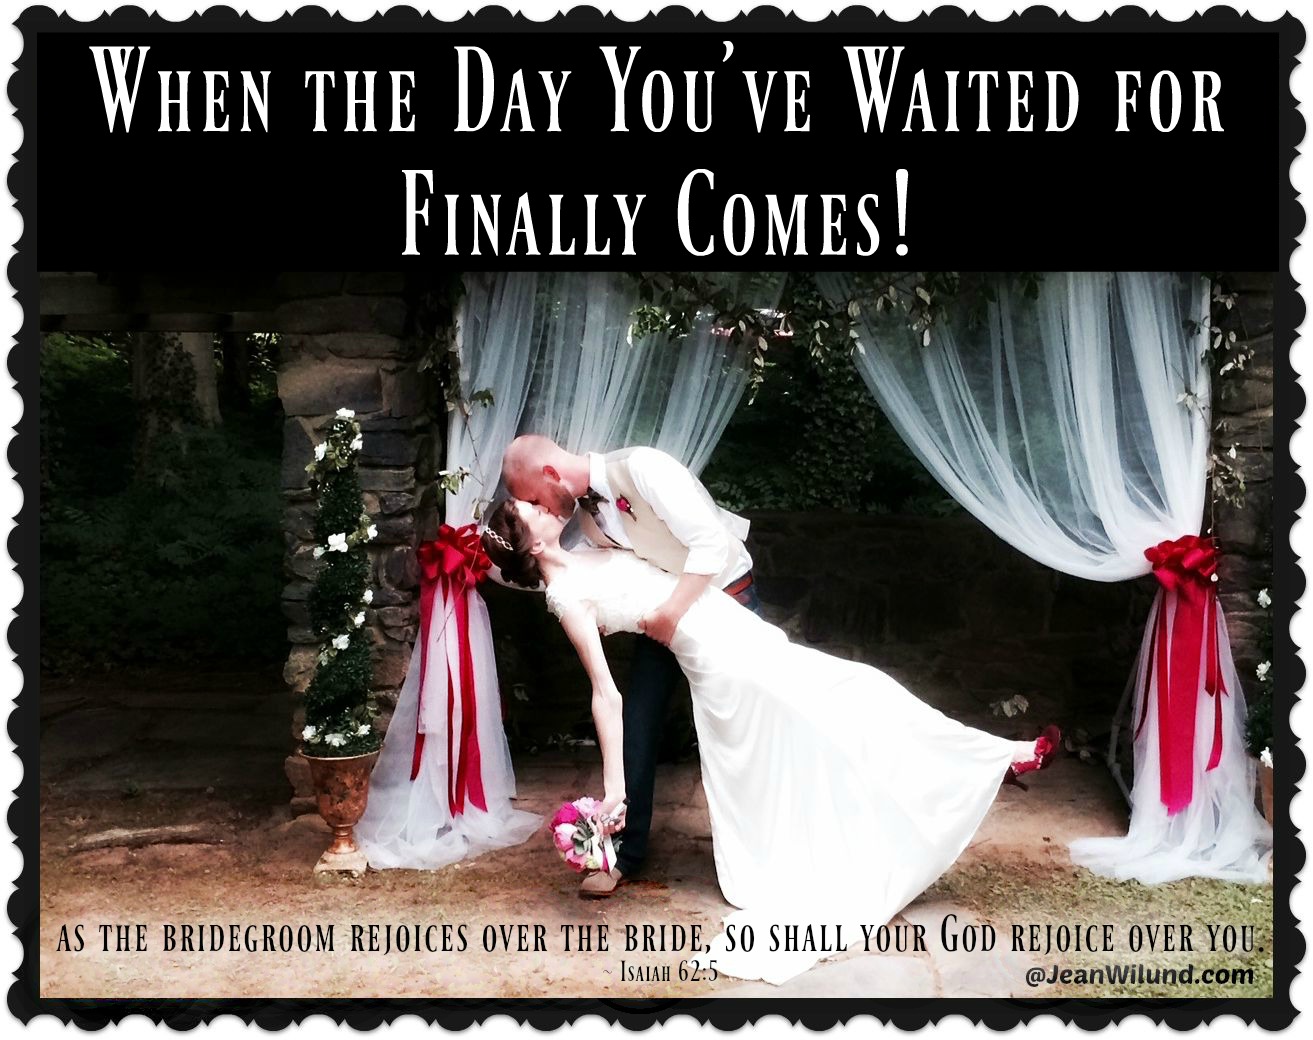 When the Day You’ve Waited For Finally Comes — And For Those Still Waiting